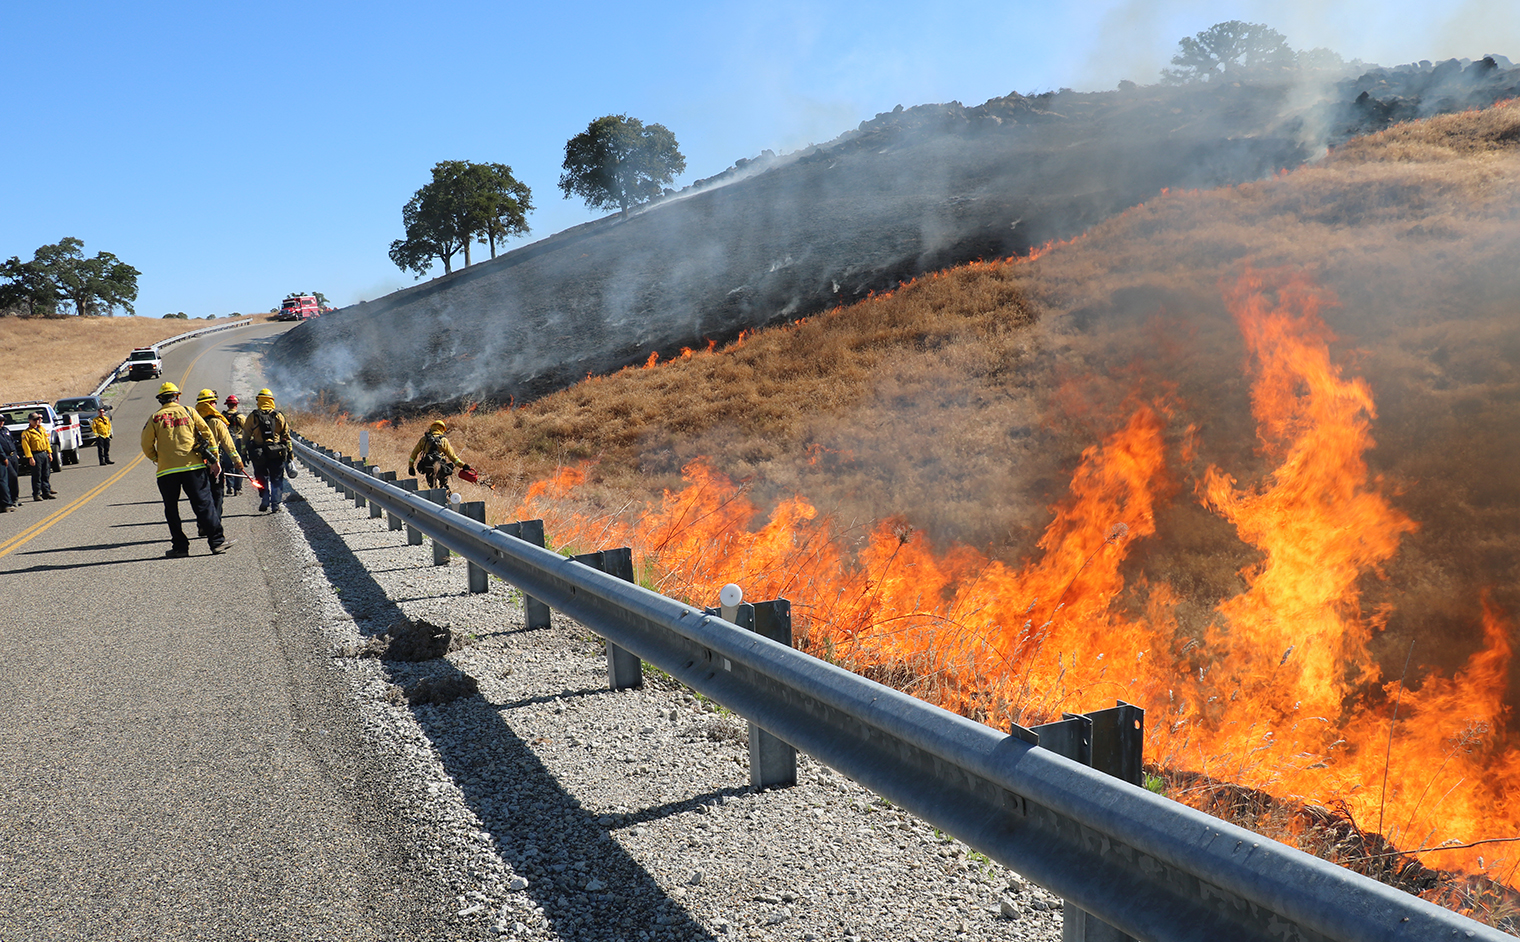 Photo of fire fighters burning grass next to guard rail along the road side.